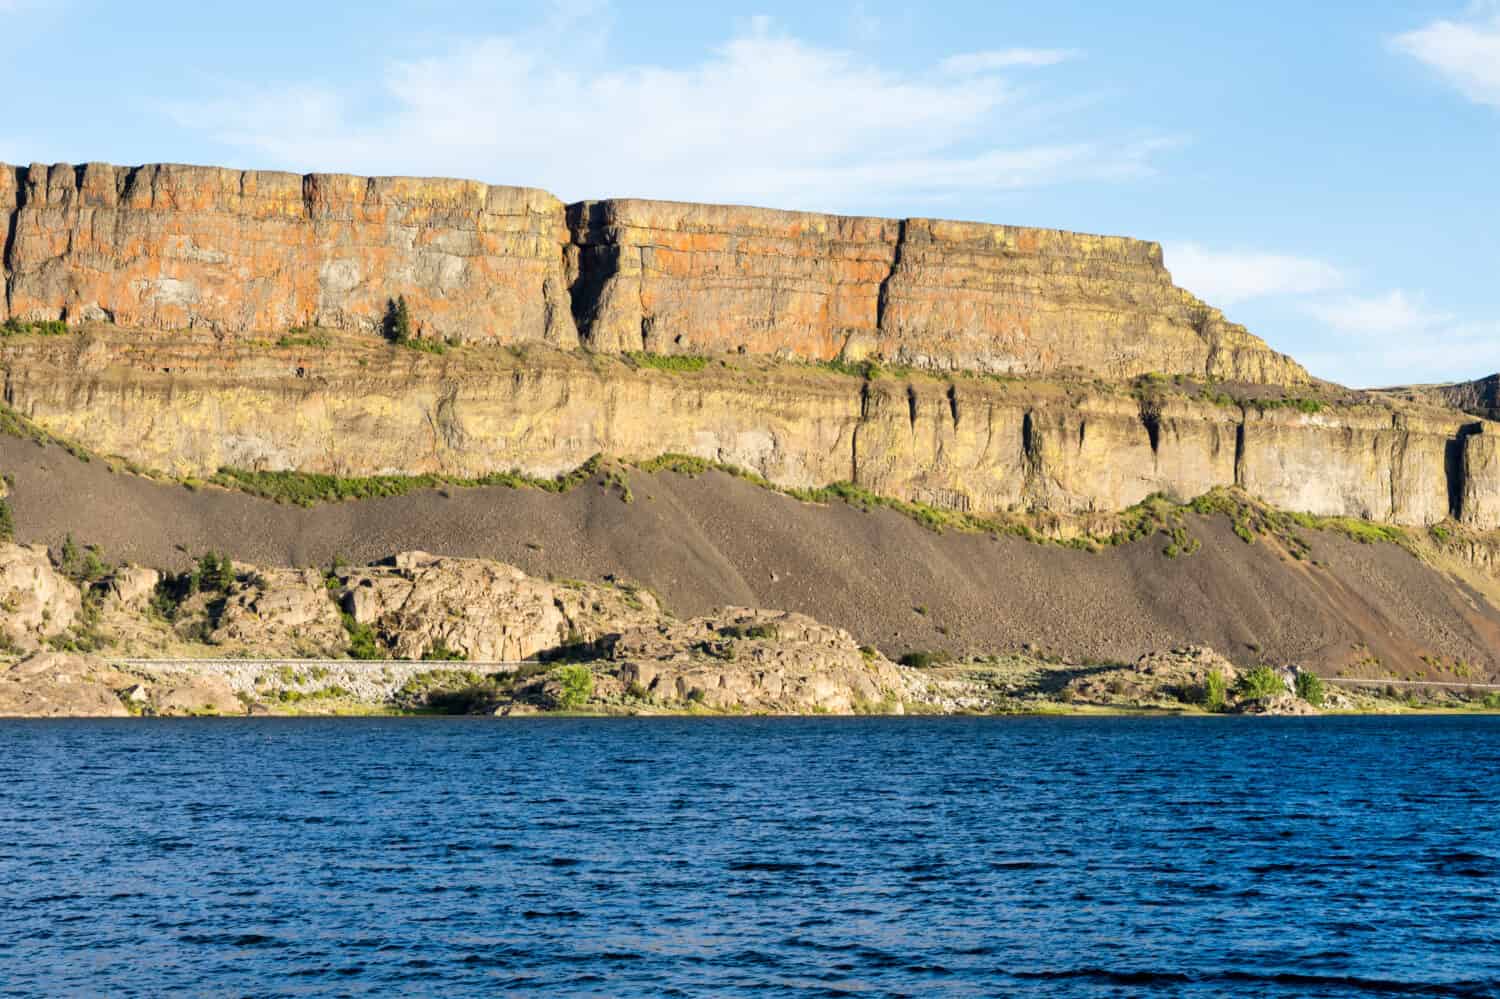 Banks lake and the walls of Grand Coulee in Steamboat Rock state park in Eastern Washington state, USA